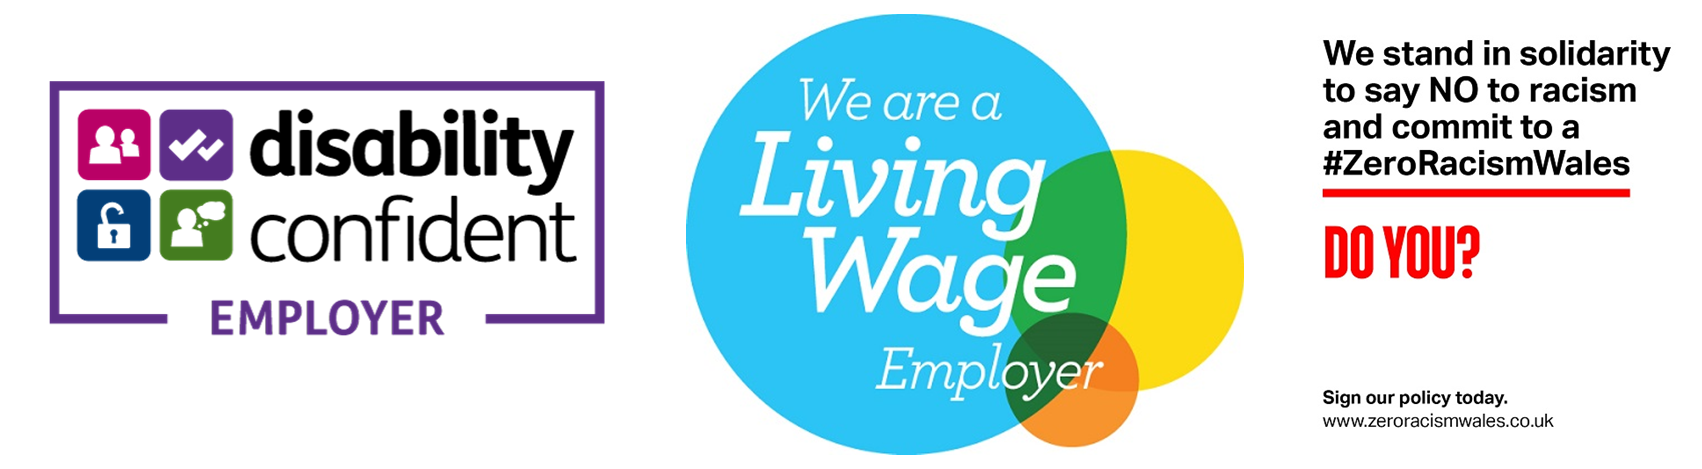 three logos: disability confident employer, living wage employer and anti-racism.